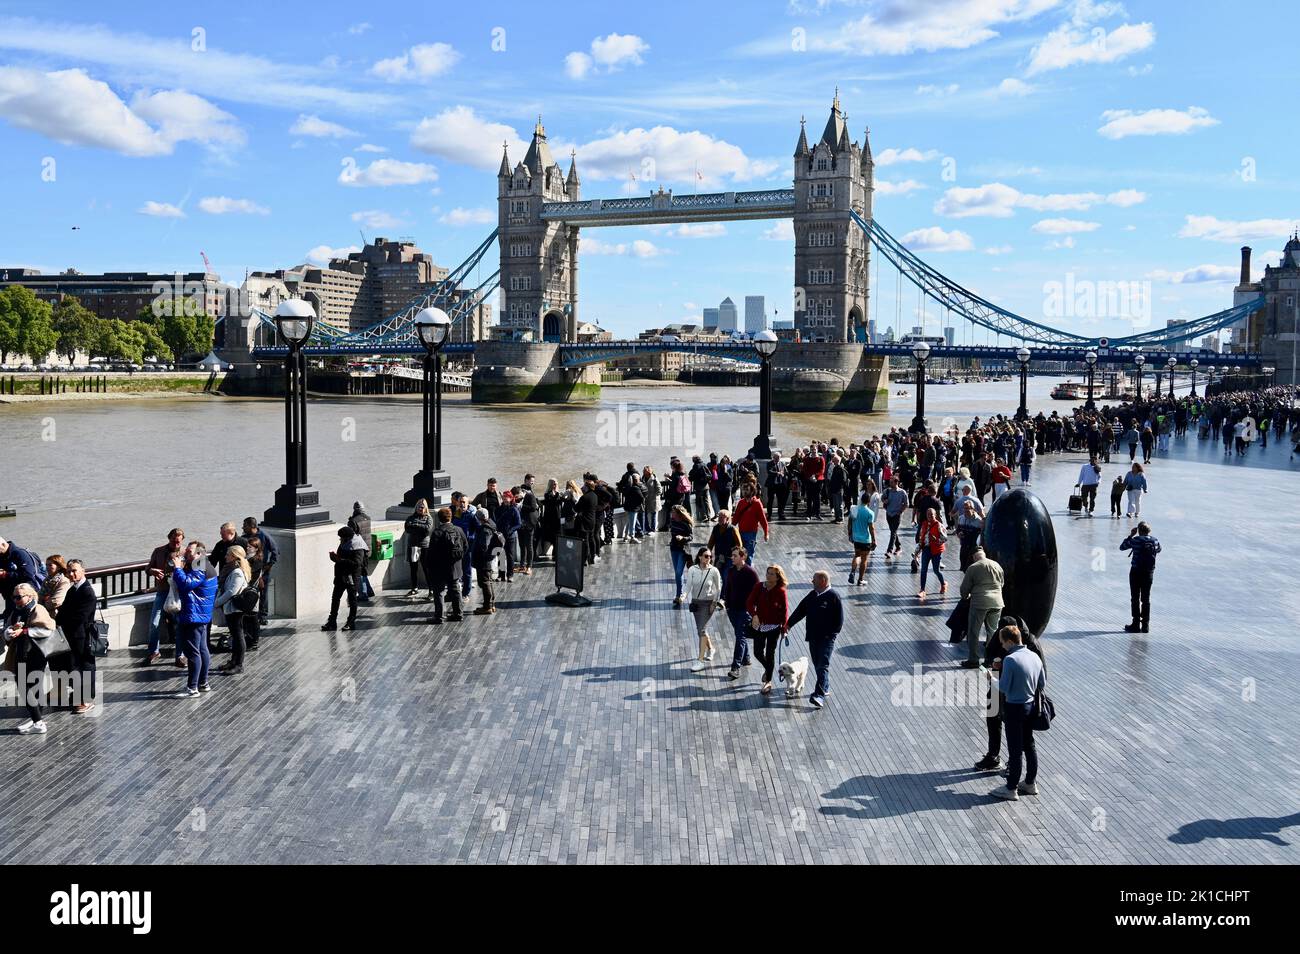 London, UK. The Queen's Walk, near Tower Bridge. The queue for Queen Elizabeth II's Lying-in-State stretched from Southwark Park to Westminster Hall taking up to 14 hours to reach it's destination. Credit: michael melia/Alamy Live News Stock Photo